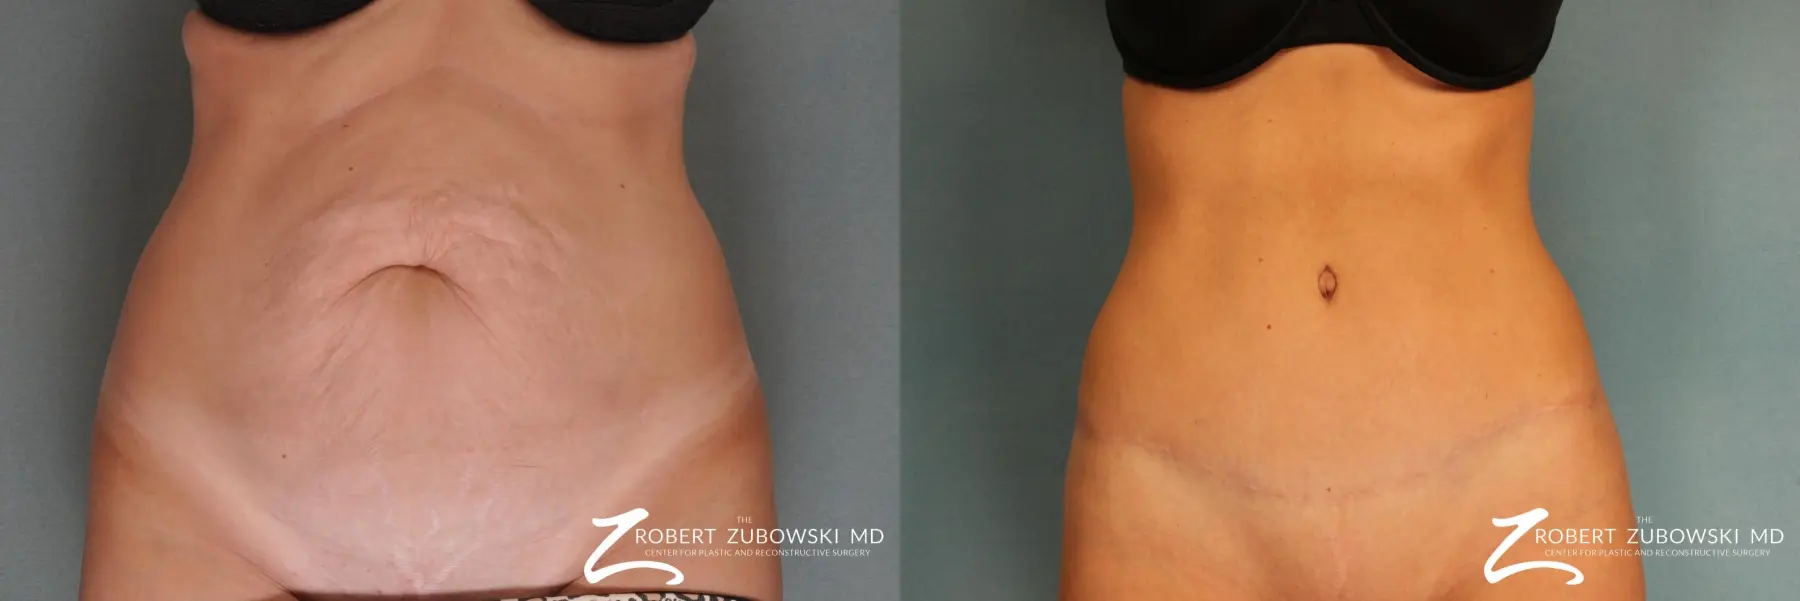 Tummy Tuck: Patient 12 - Before and After 1